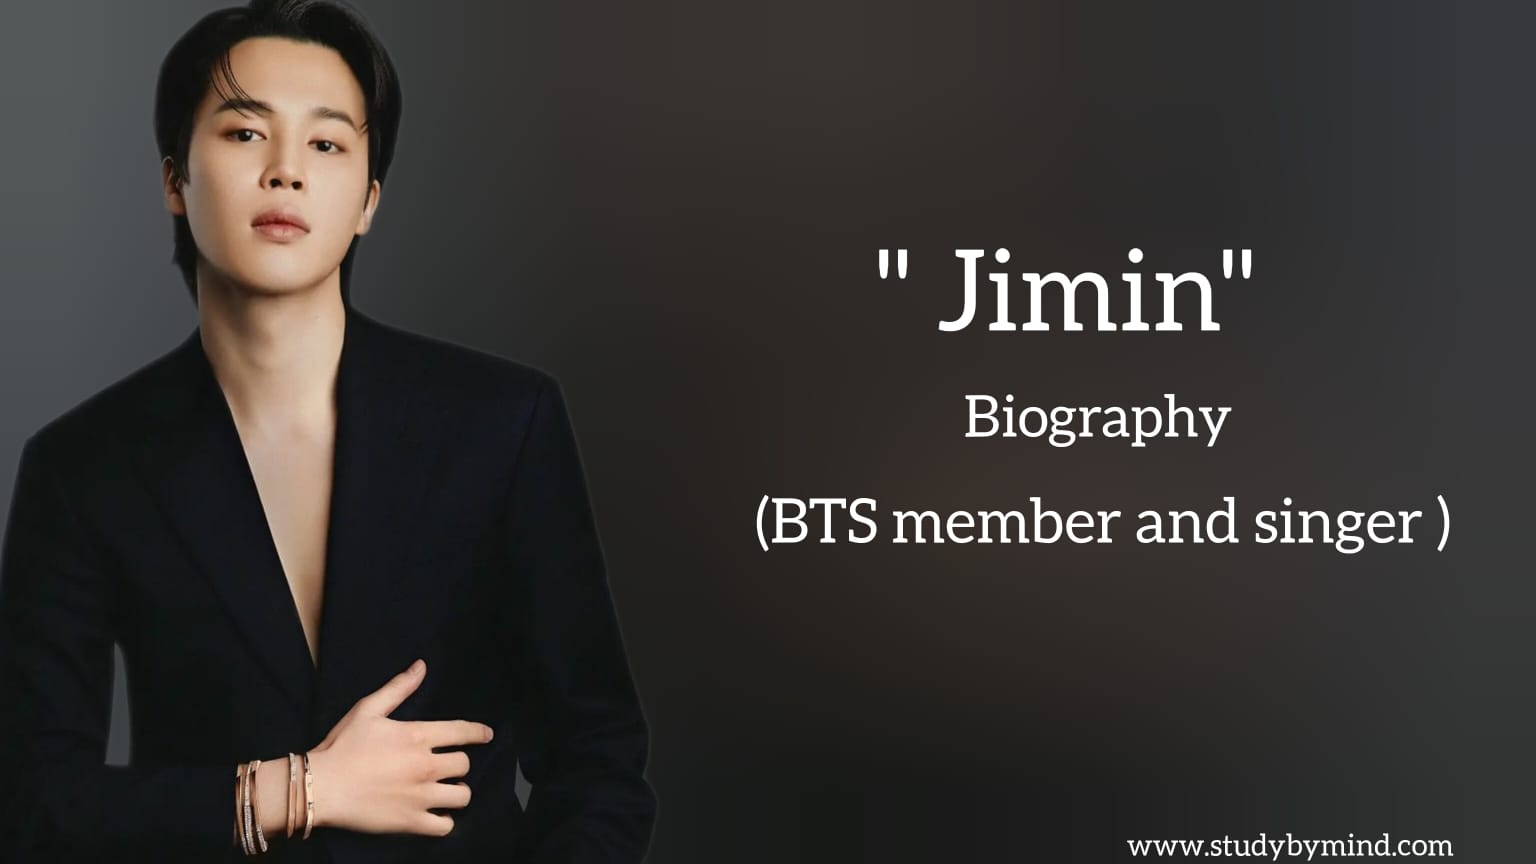 Jimin biography in english (BTS Member and Dancer) - Study By Mind